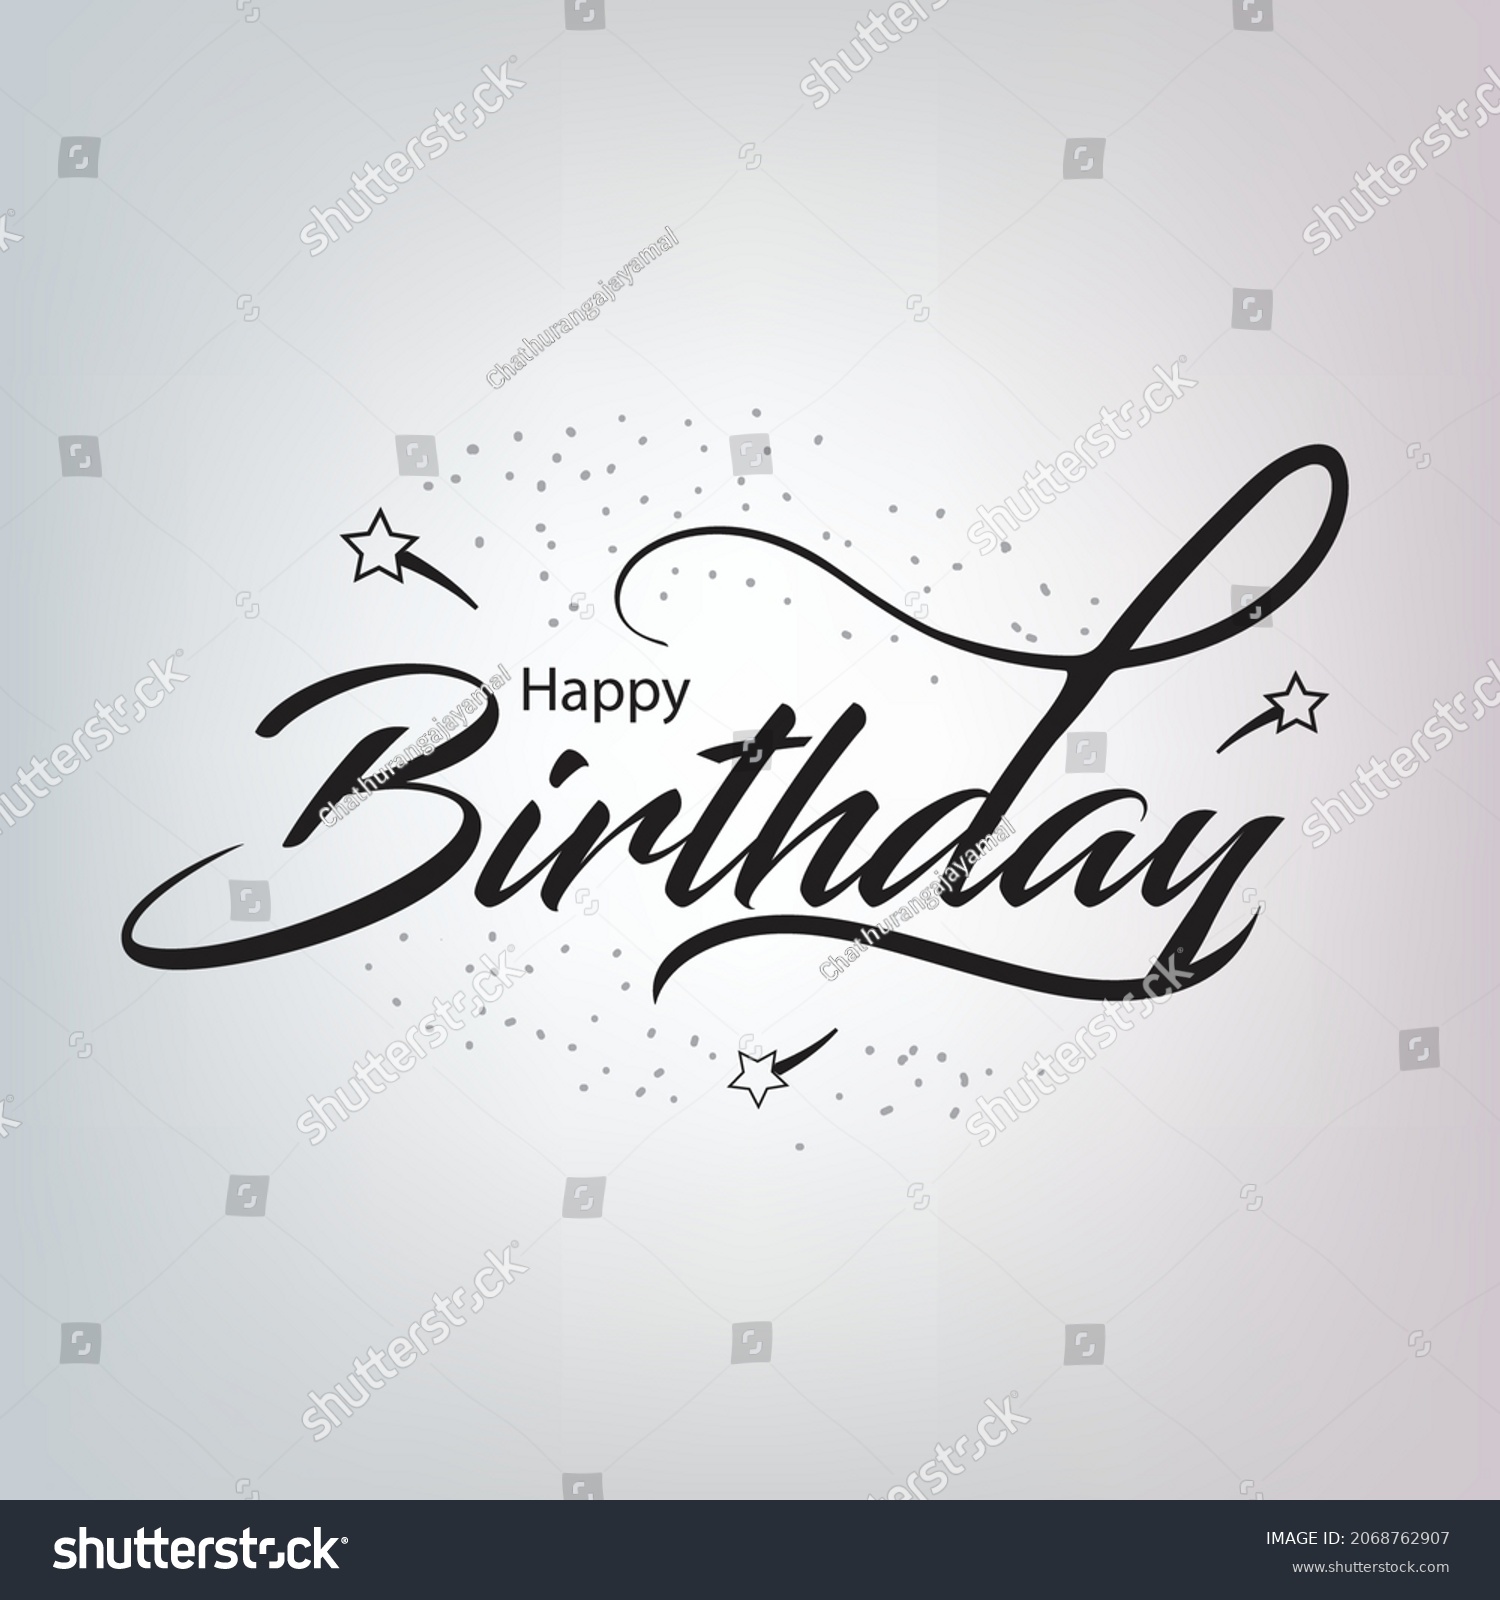 Happy Birthdaybeautiful Greeting Card Scratched Calligraphy Stock